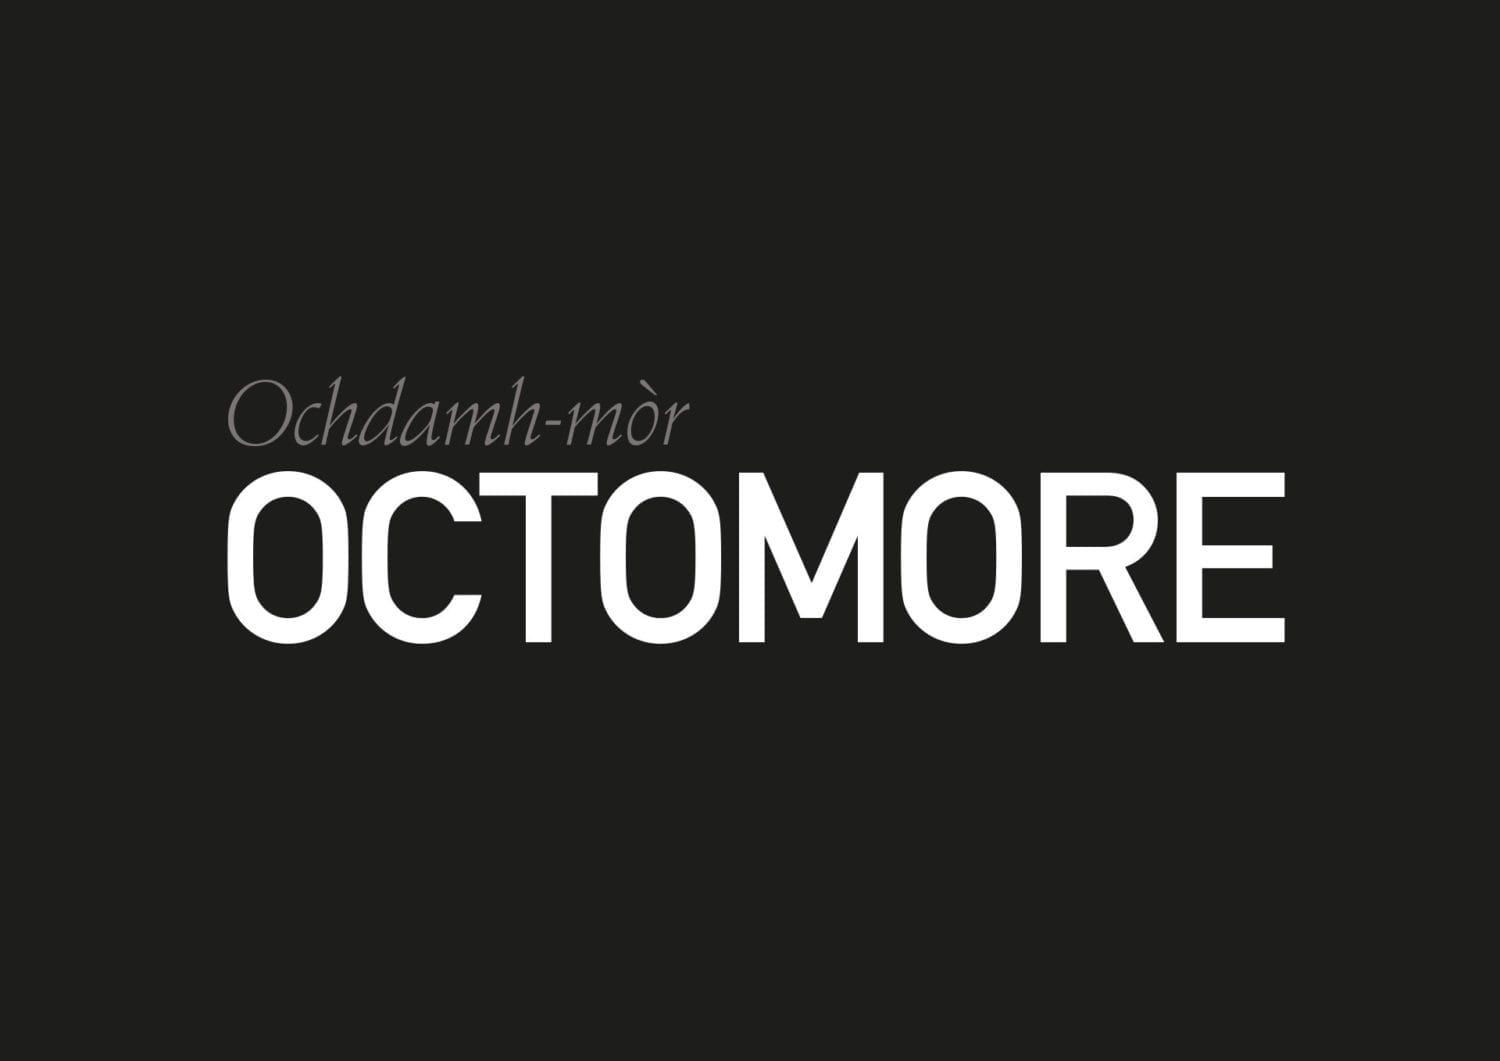 If you want more, you go Octomore?